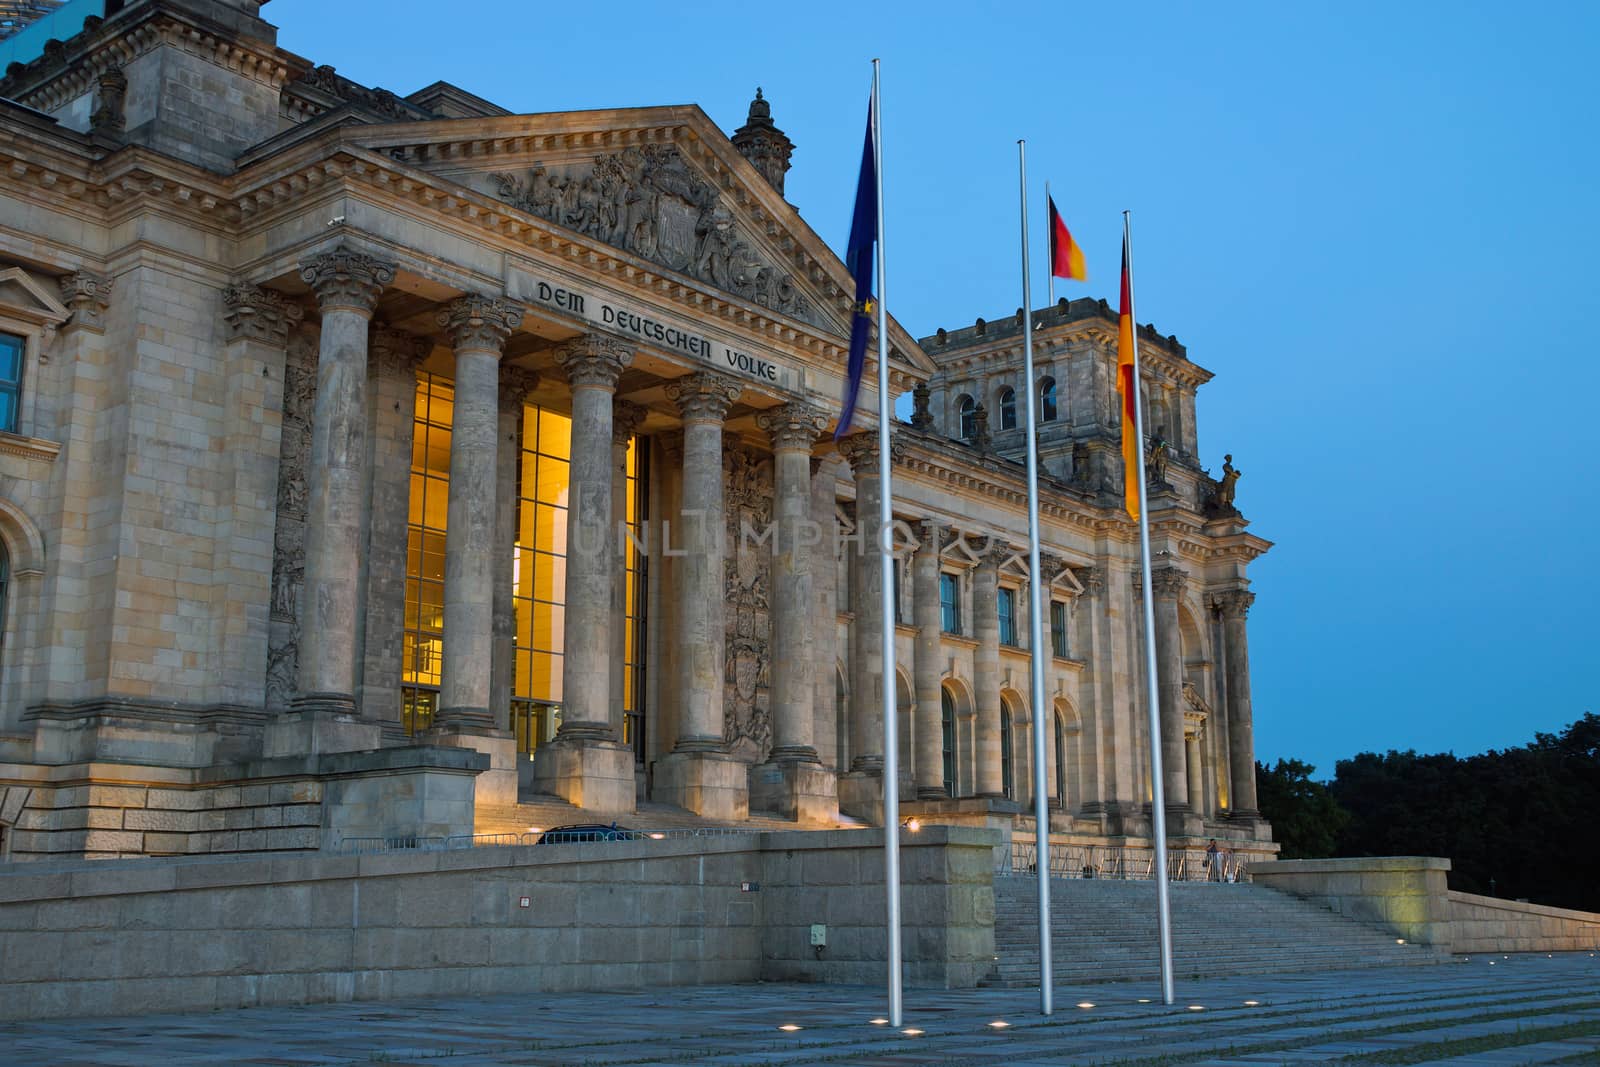 The famous Reichstag in Berlin shortly after sunset